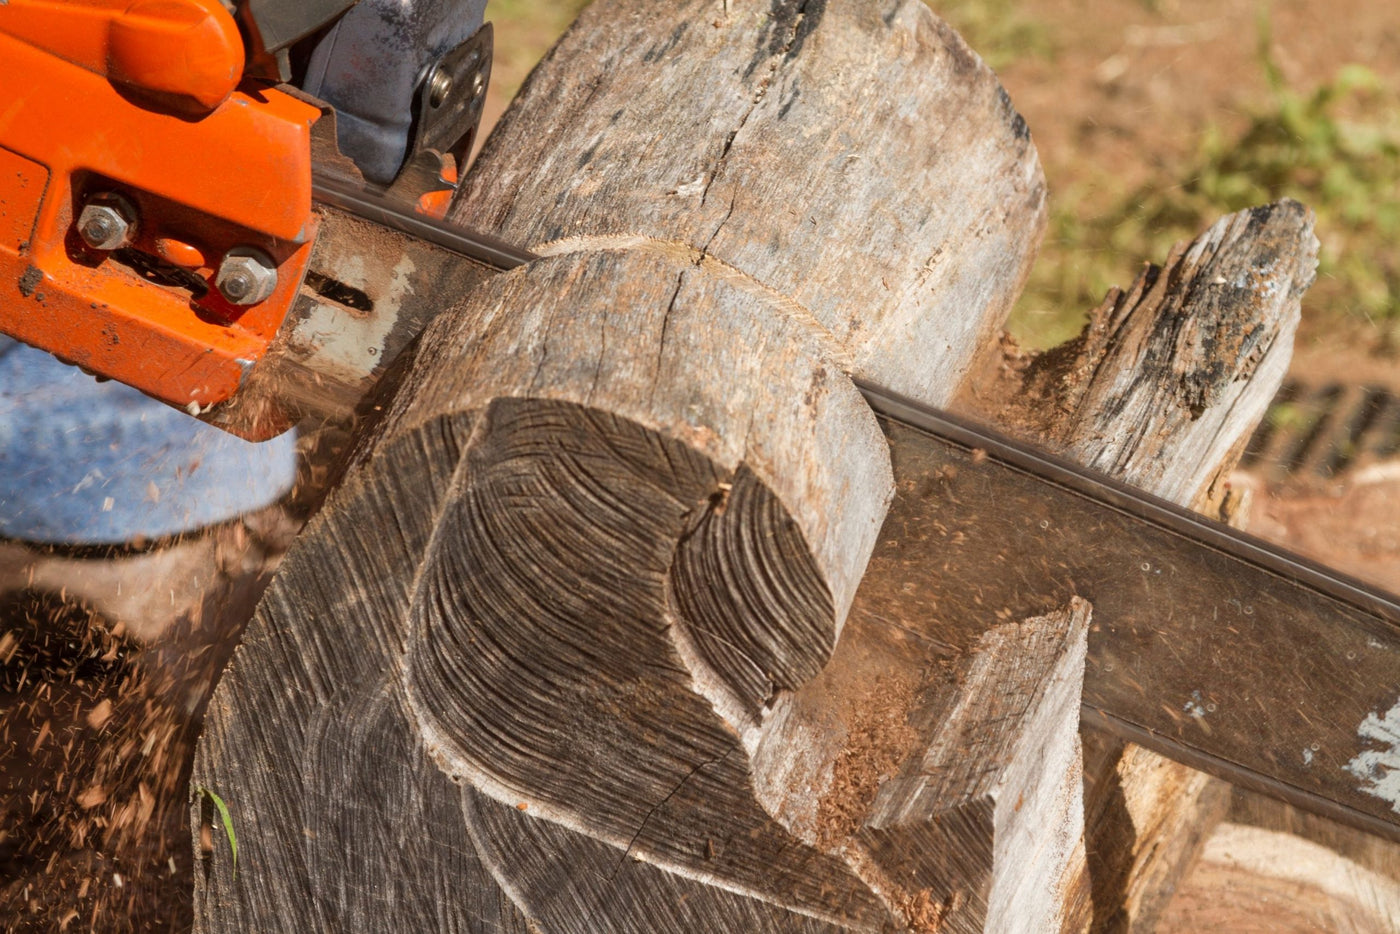 Should You Run a Chainsaw at Full Throttle?